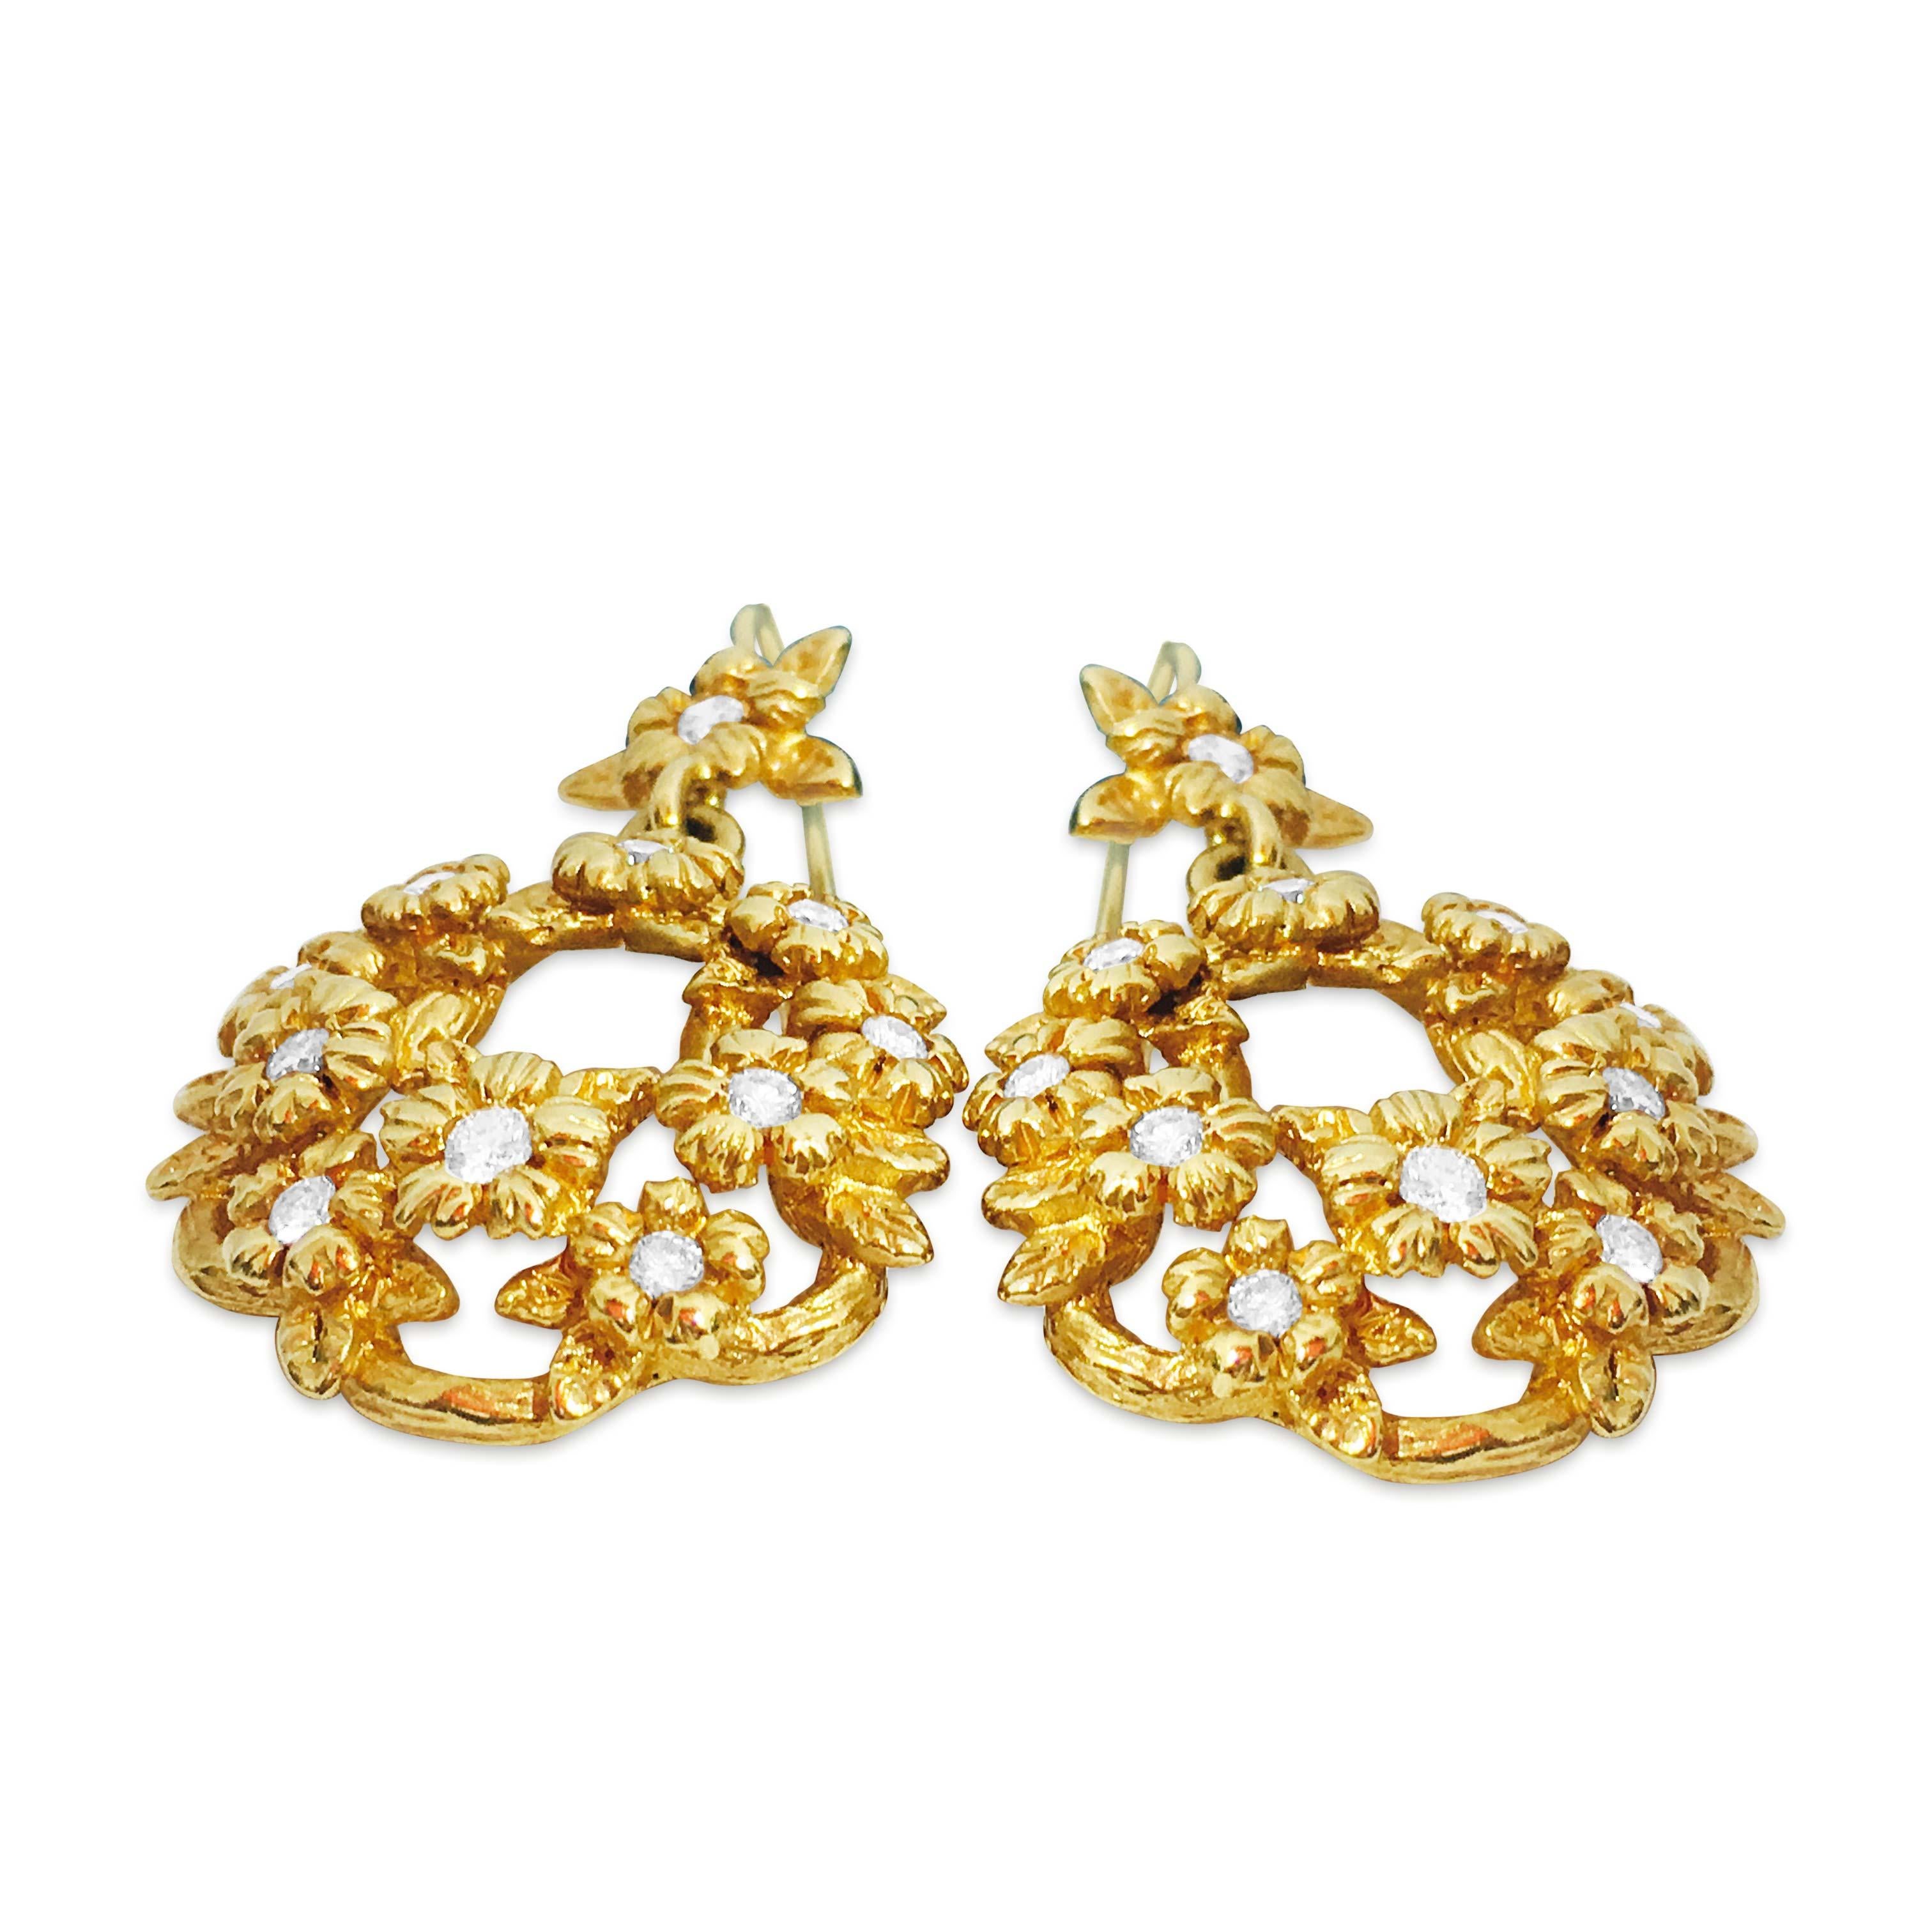 In 18k yellow gold, these stunning earrings by Stephen Dweck feature a total carat weight of 0.70cts of round brilliant cut diamonds, boasting F-G color and SI clarity. With a weight of 14.87 g and dimensions of 0.8 x 1.4 inches, they exude elegance